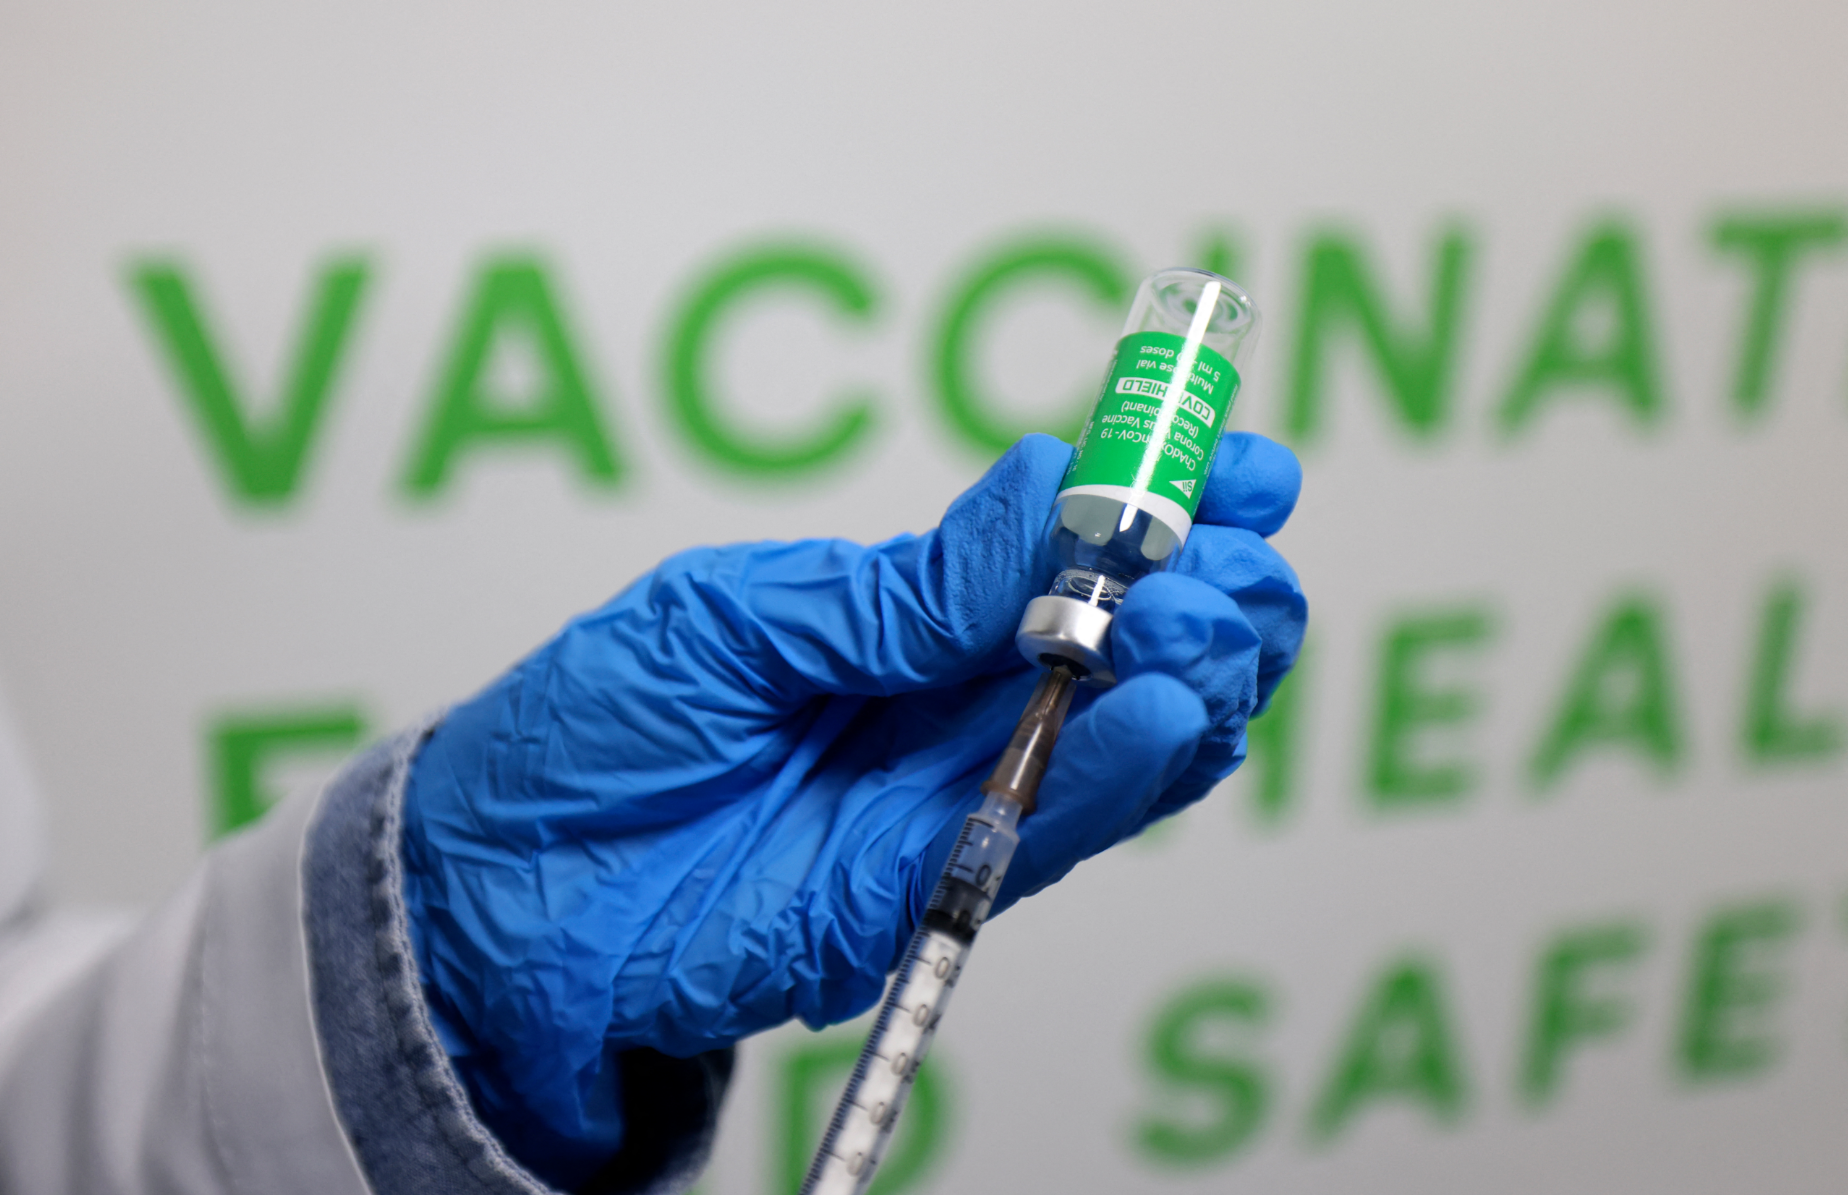 A health worker prepares an injection of the Oxford–AstraZeneca vaccine (Covishield) against the coronavirus at a vaccination centre set up at the Dubai International Financial Center in the Gulf emirate of Dubai, on February 3, 2021. (AFP)